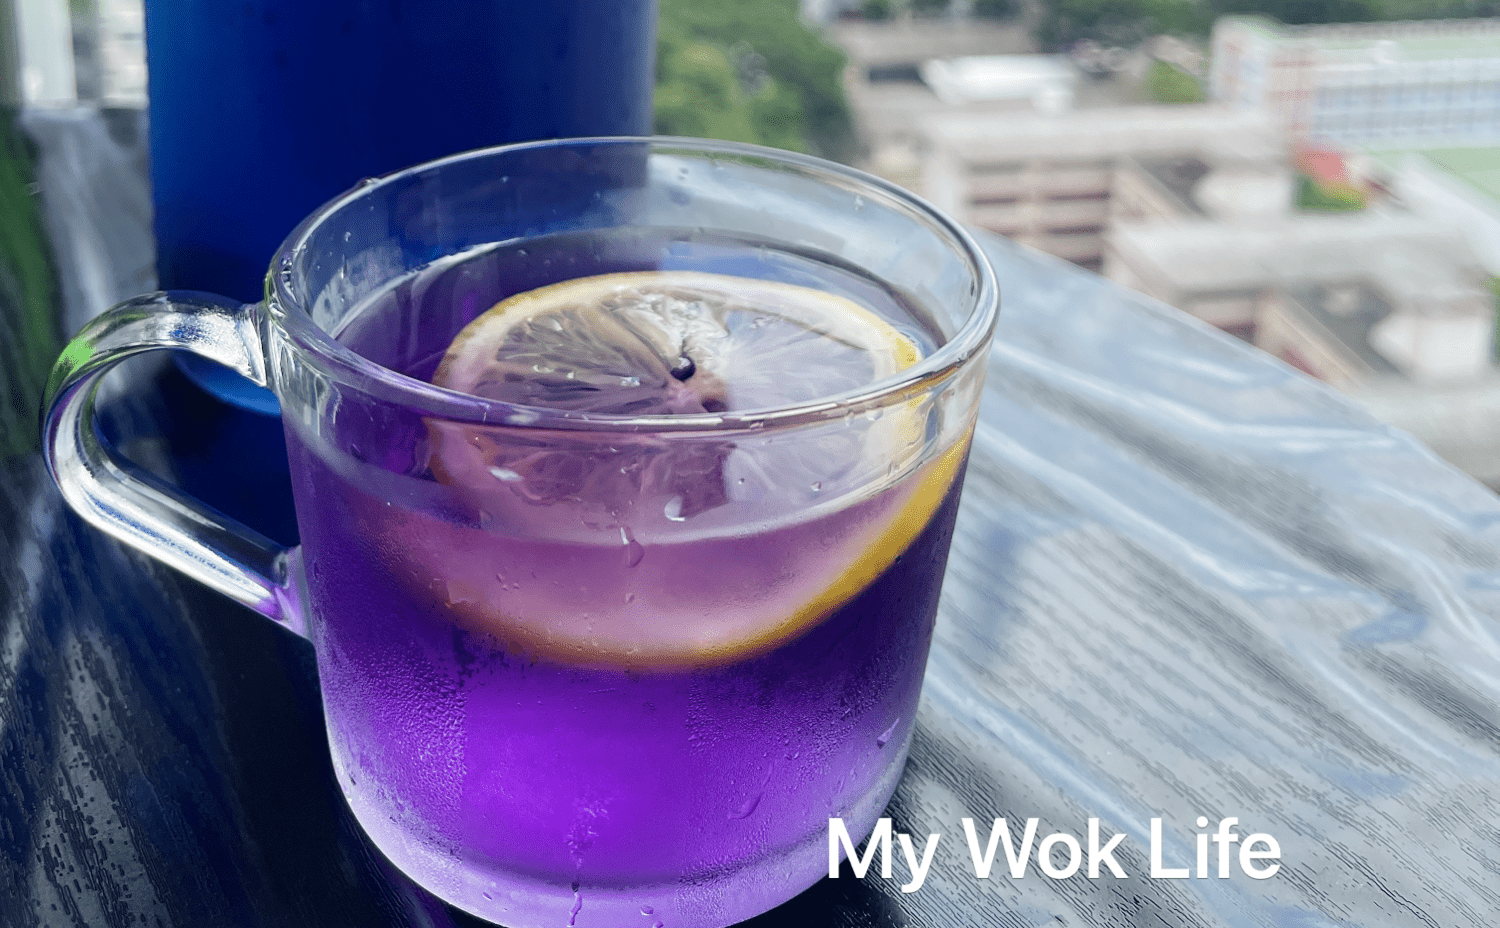 My Wok Life Cooking Blog - Cold Brew Butterfly Pea Tea (Great Blue Pea Water) 冷泡蝶豆花茶  - Handmade Bread Rolls